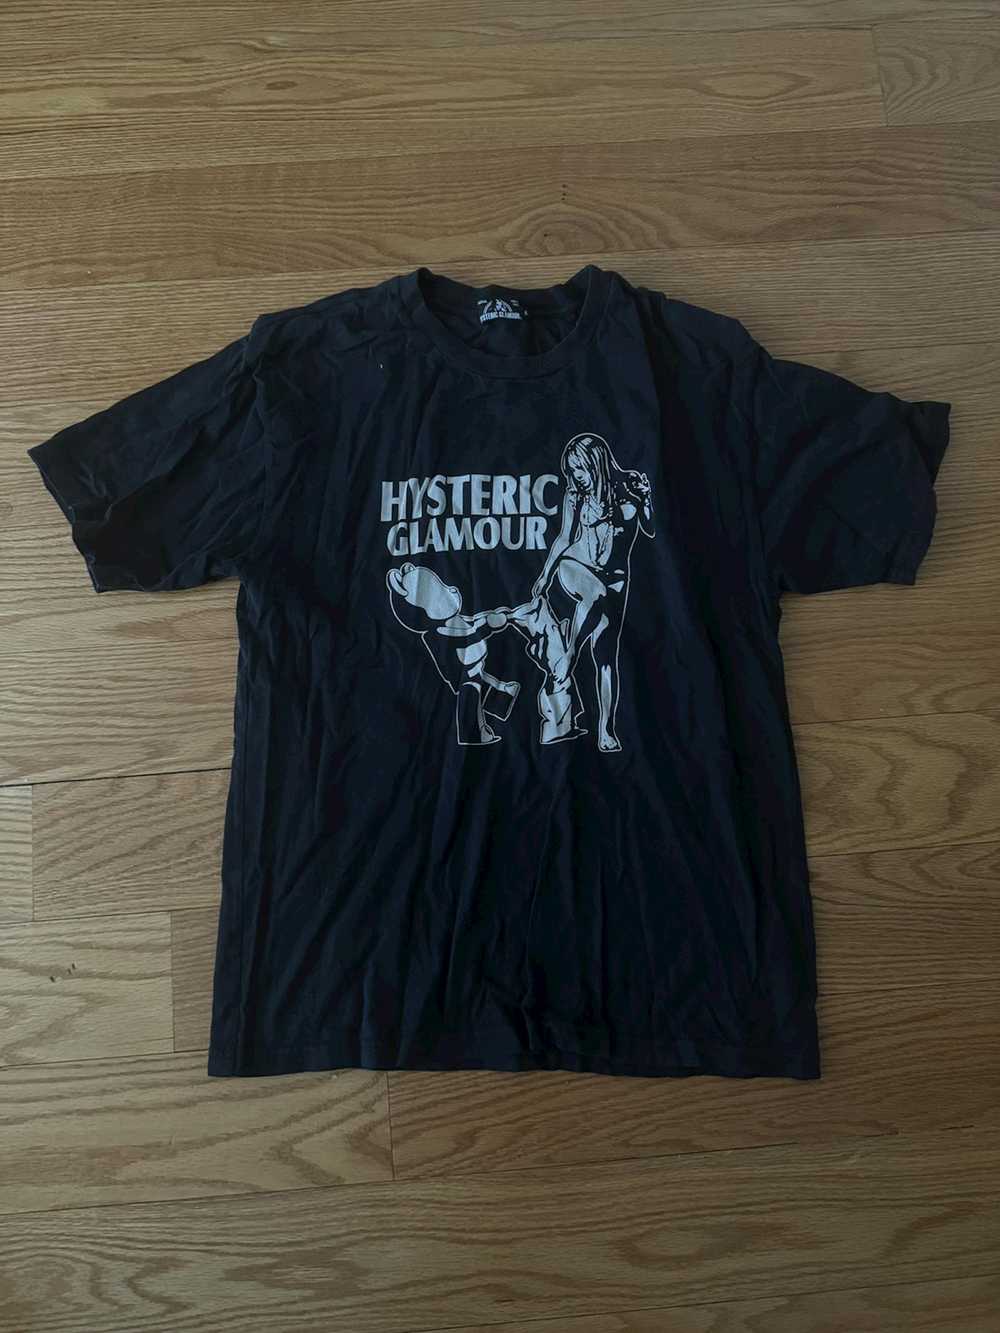 Hysteric Glamour Hysteric Glamour Tshirt - image 1